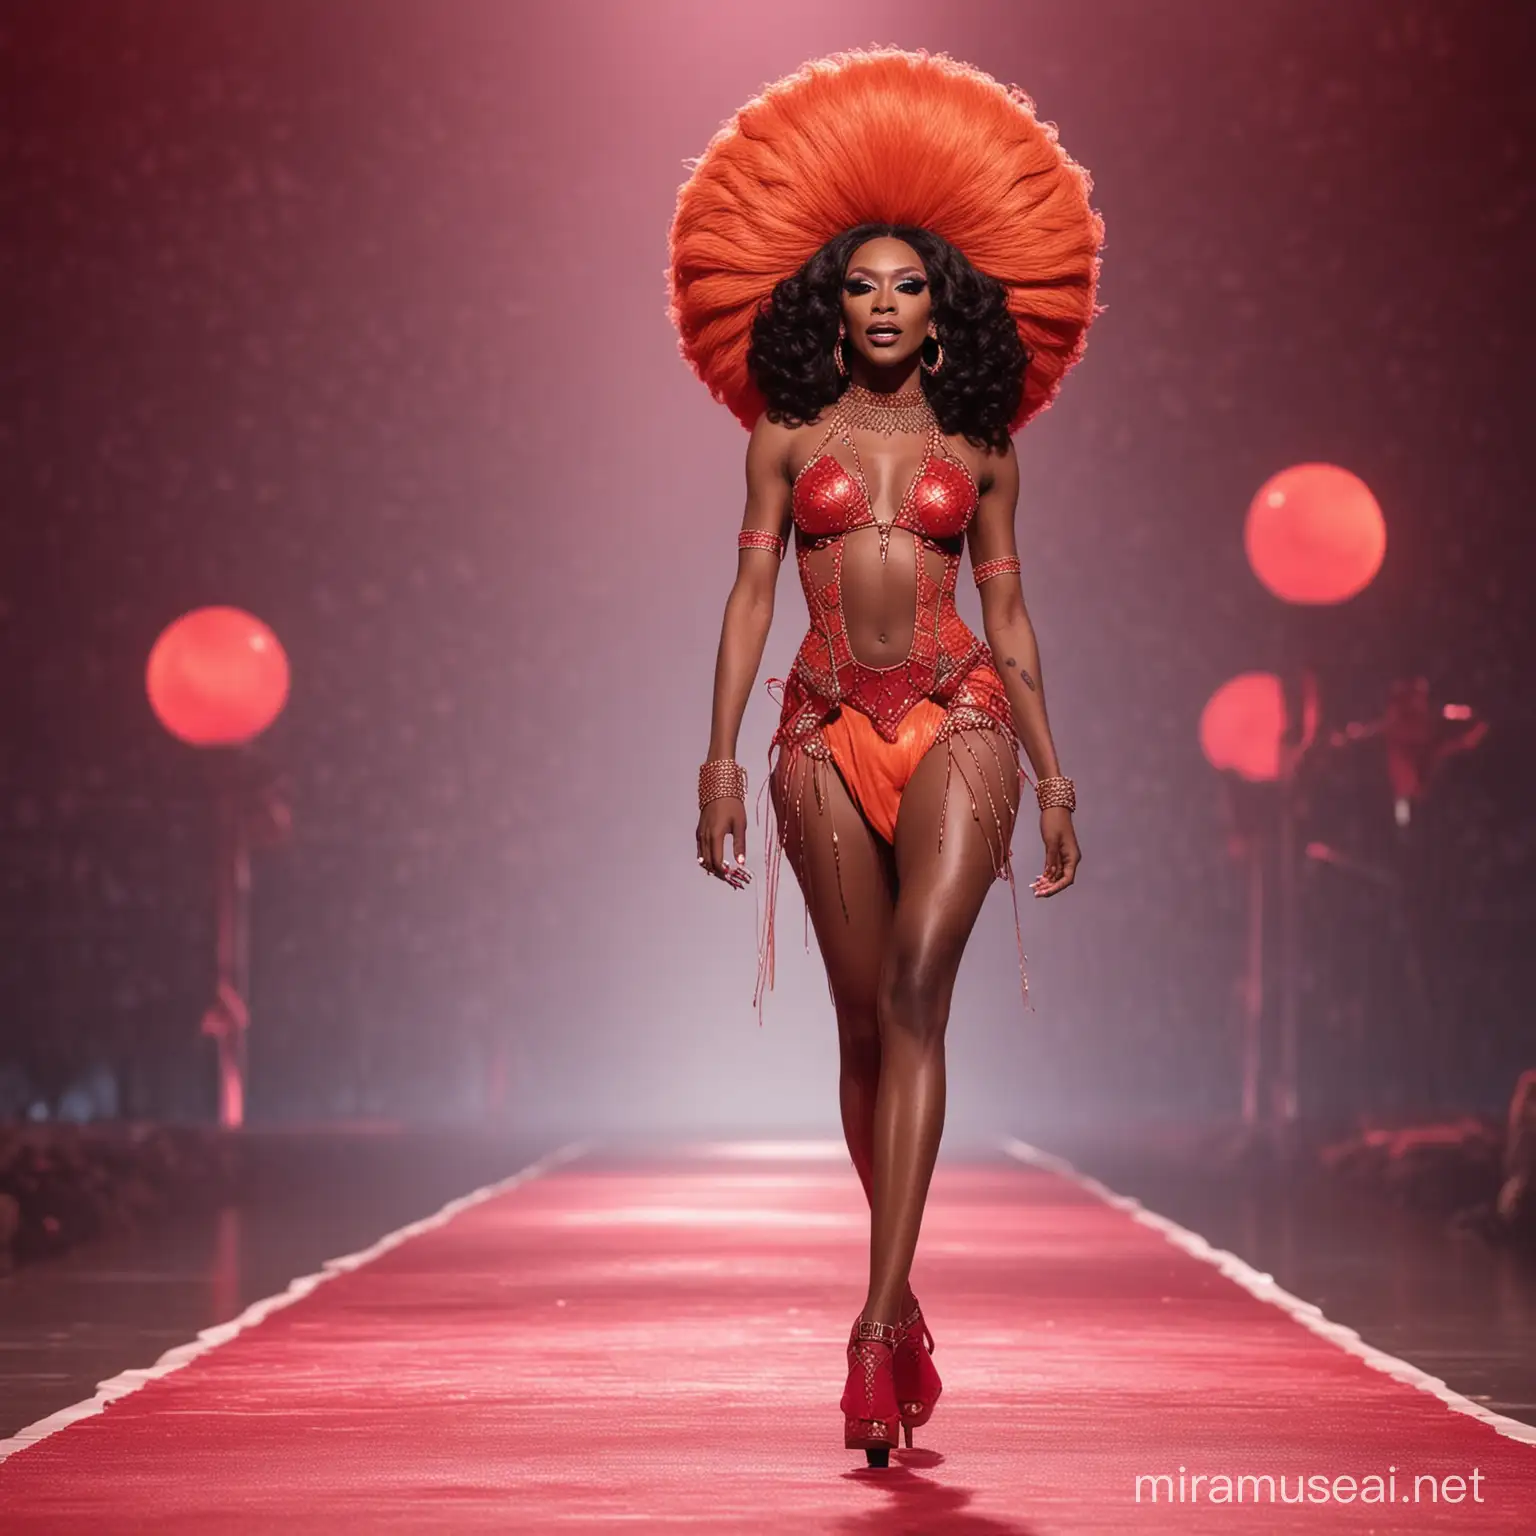 African Drag Queen Strutting in BloodmoonInspired Outfit on RuPauls Runway